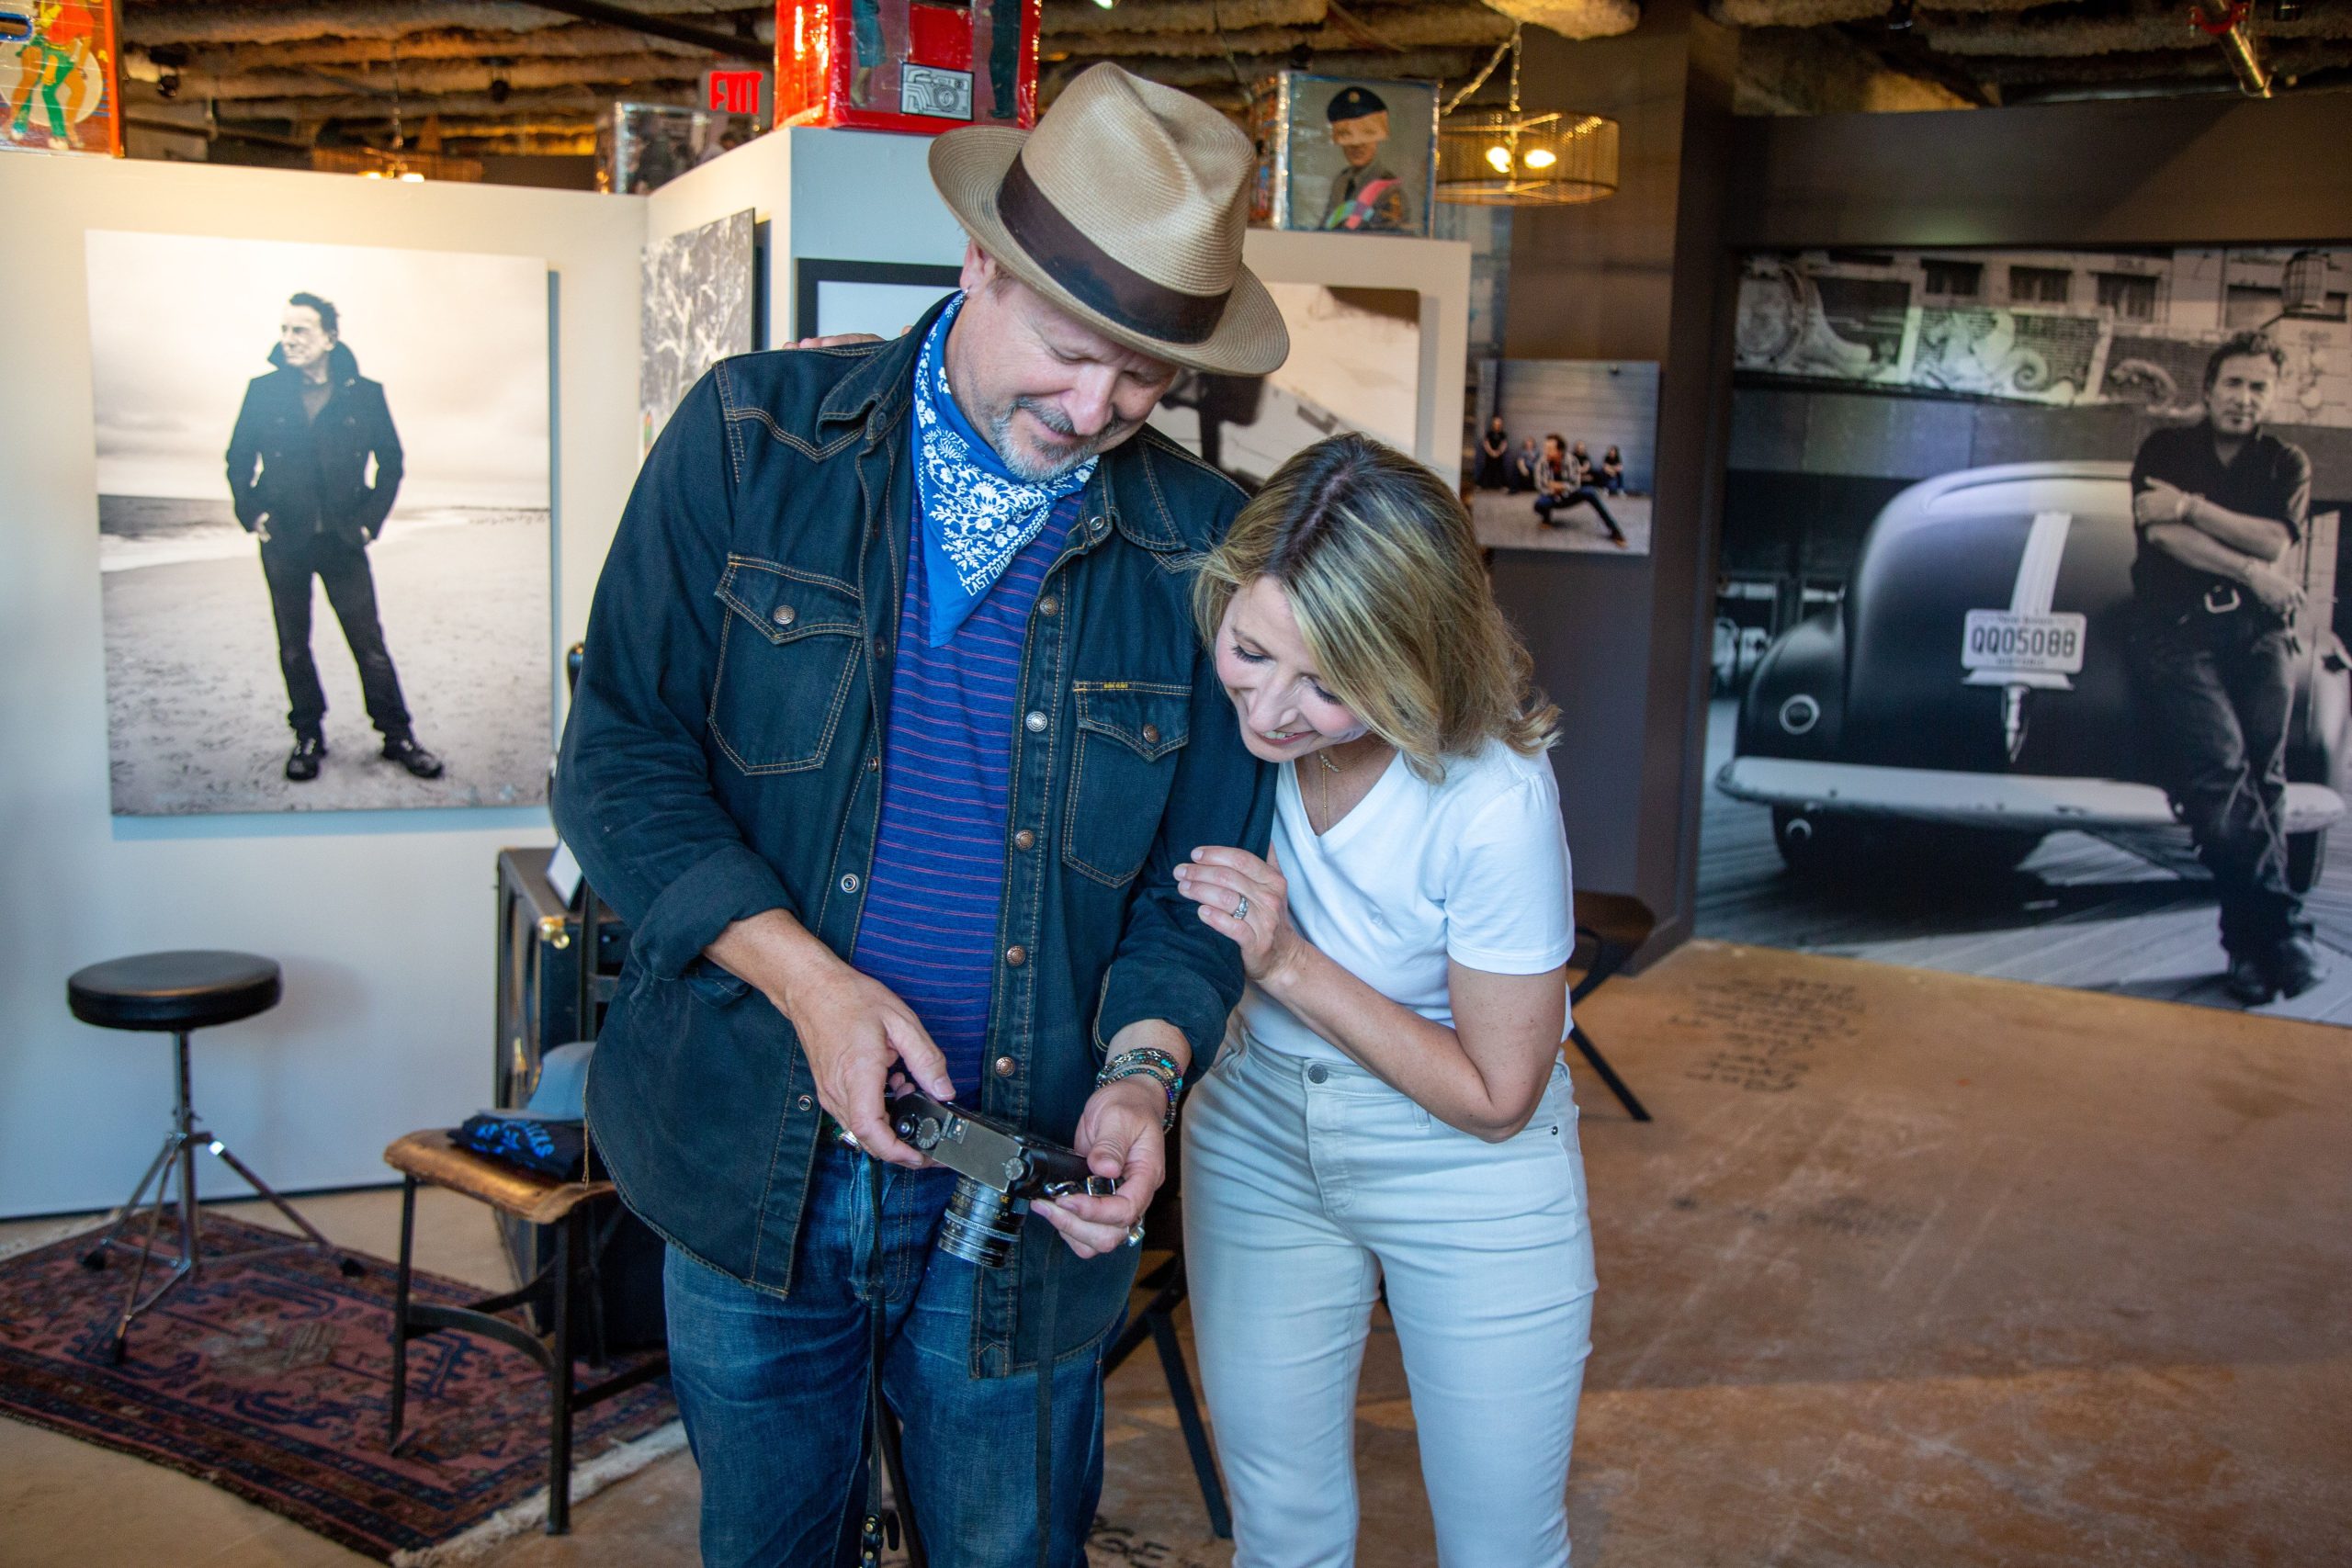 Samantha meets Danny Clinch at Transparent Clinch Gallery in Asbury Park New Jersey